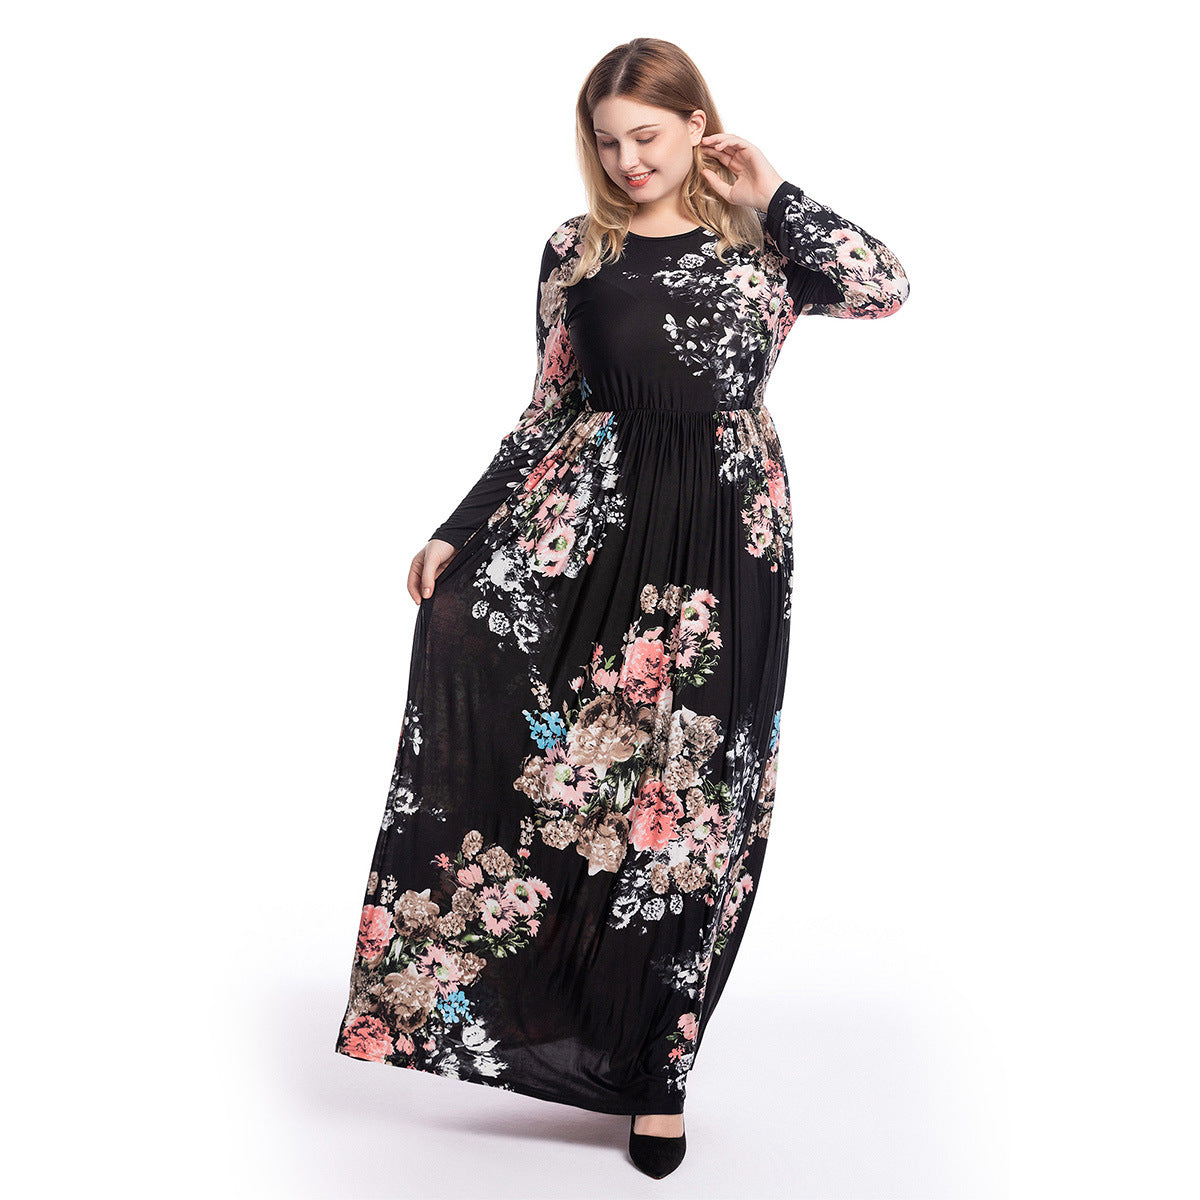 Hot Selling Plus Size Women's Printed Slim Long-sleeved Round Neck Dress